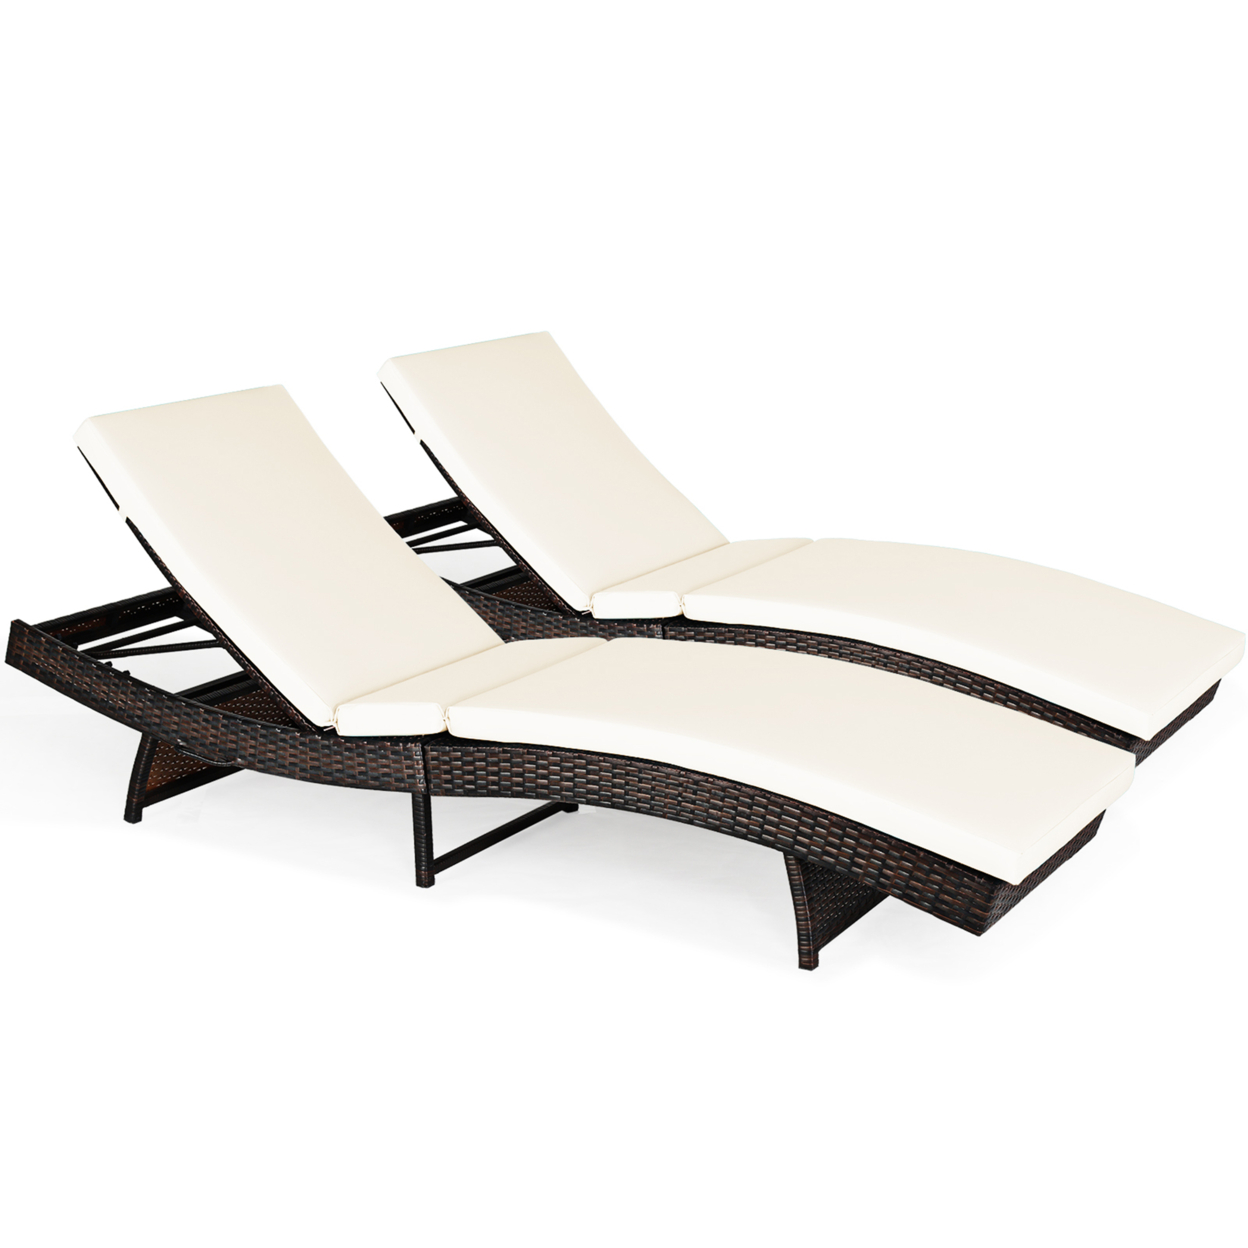 Set Of 2 Foldable Patio Rattan Chaise Lounge Chair W/5 Back Positions White Cushion